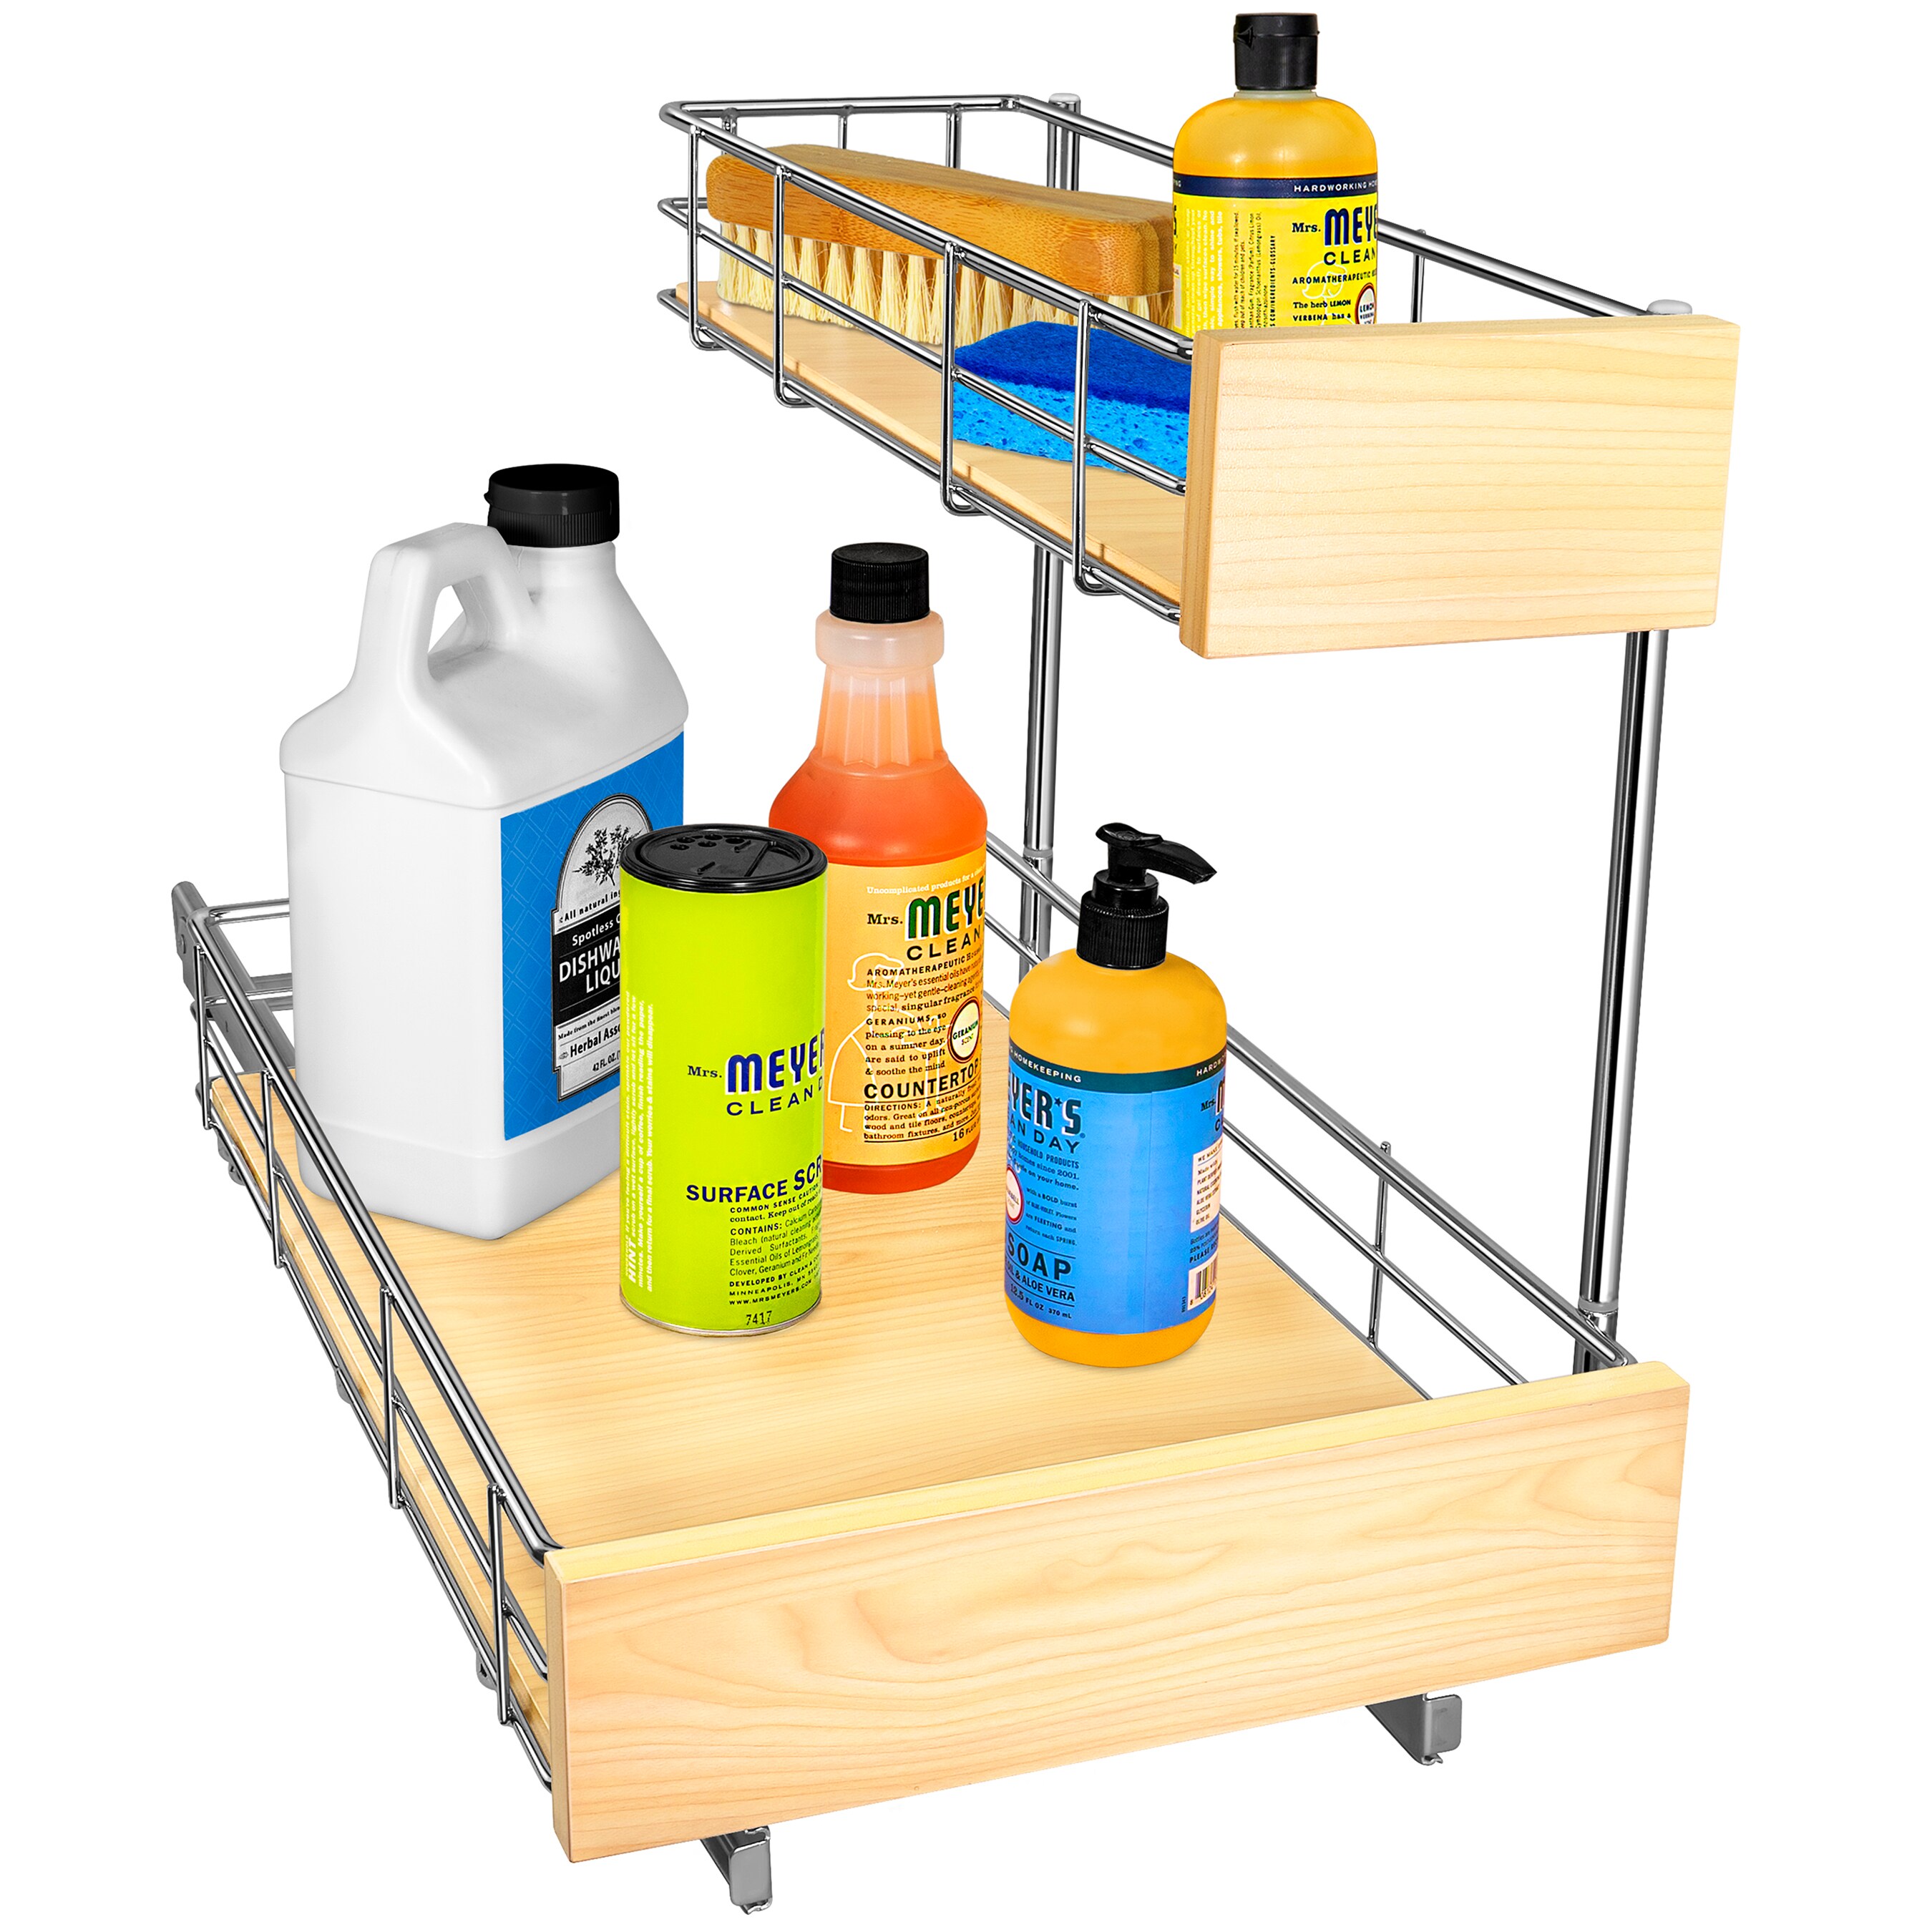 NUOYANG Pull Out Cabinet Organizer Under Sink Organizers and